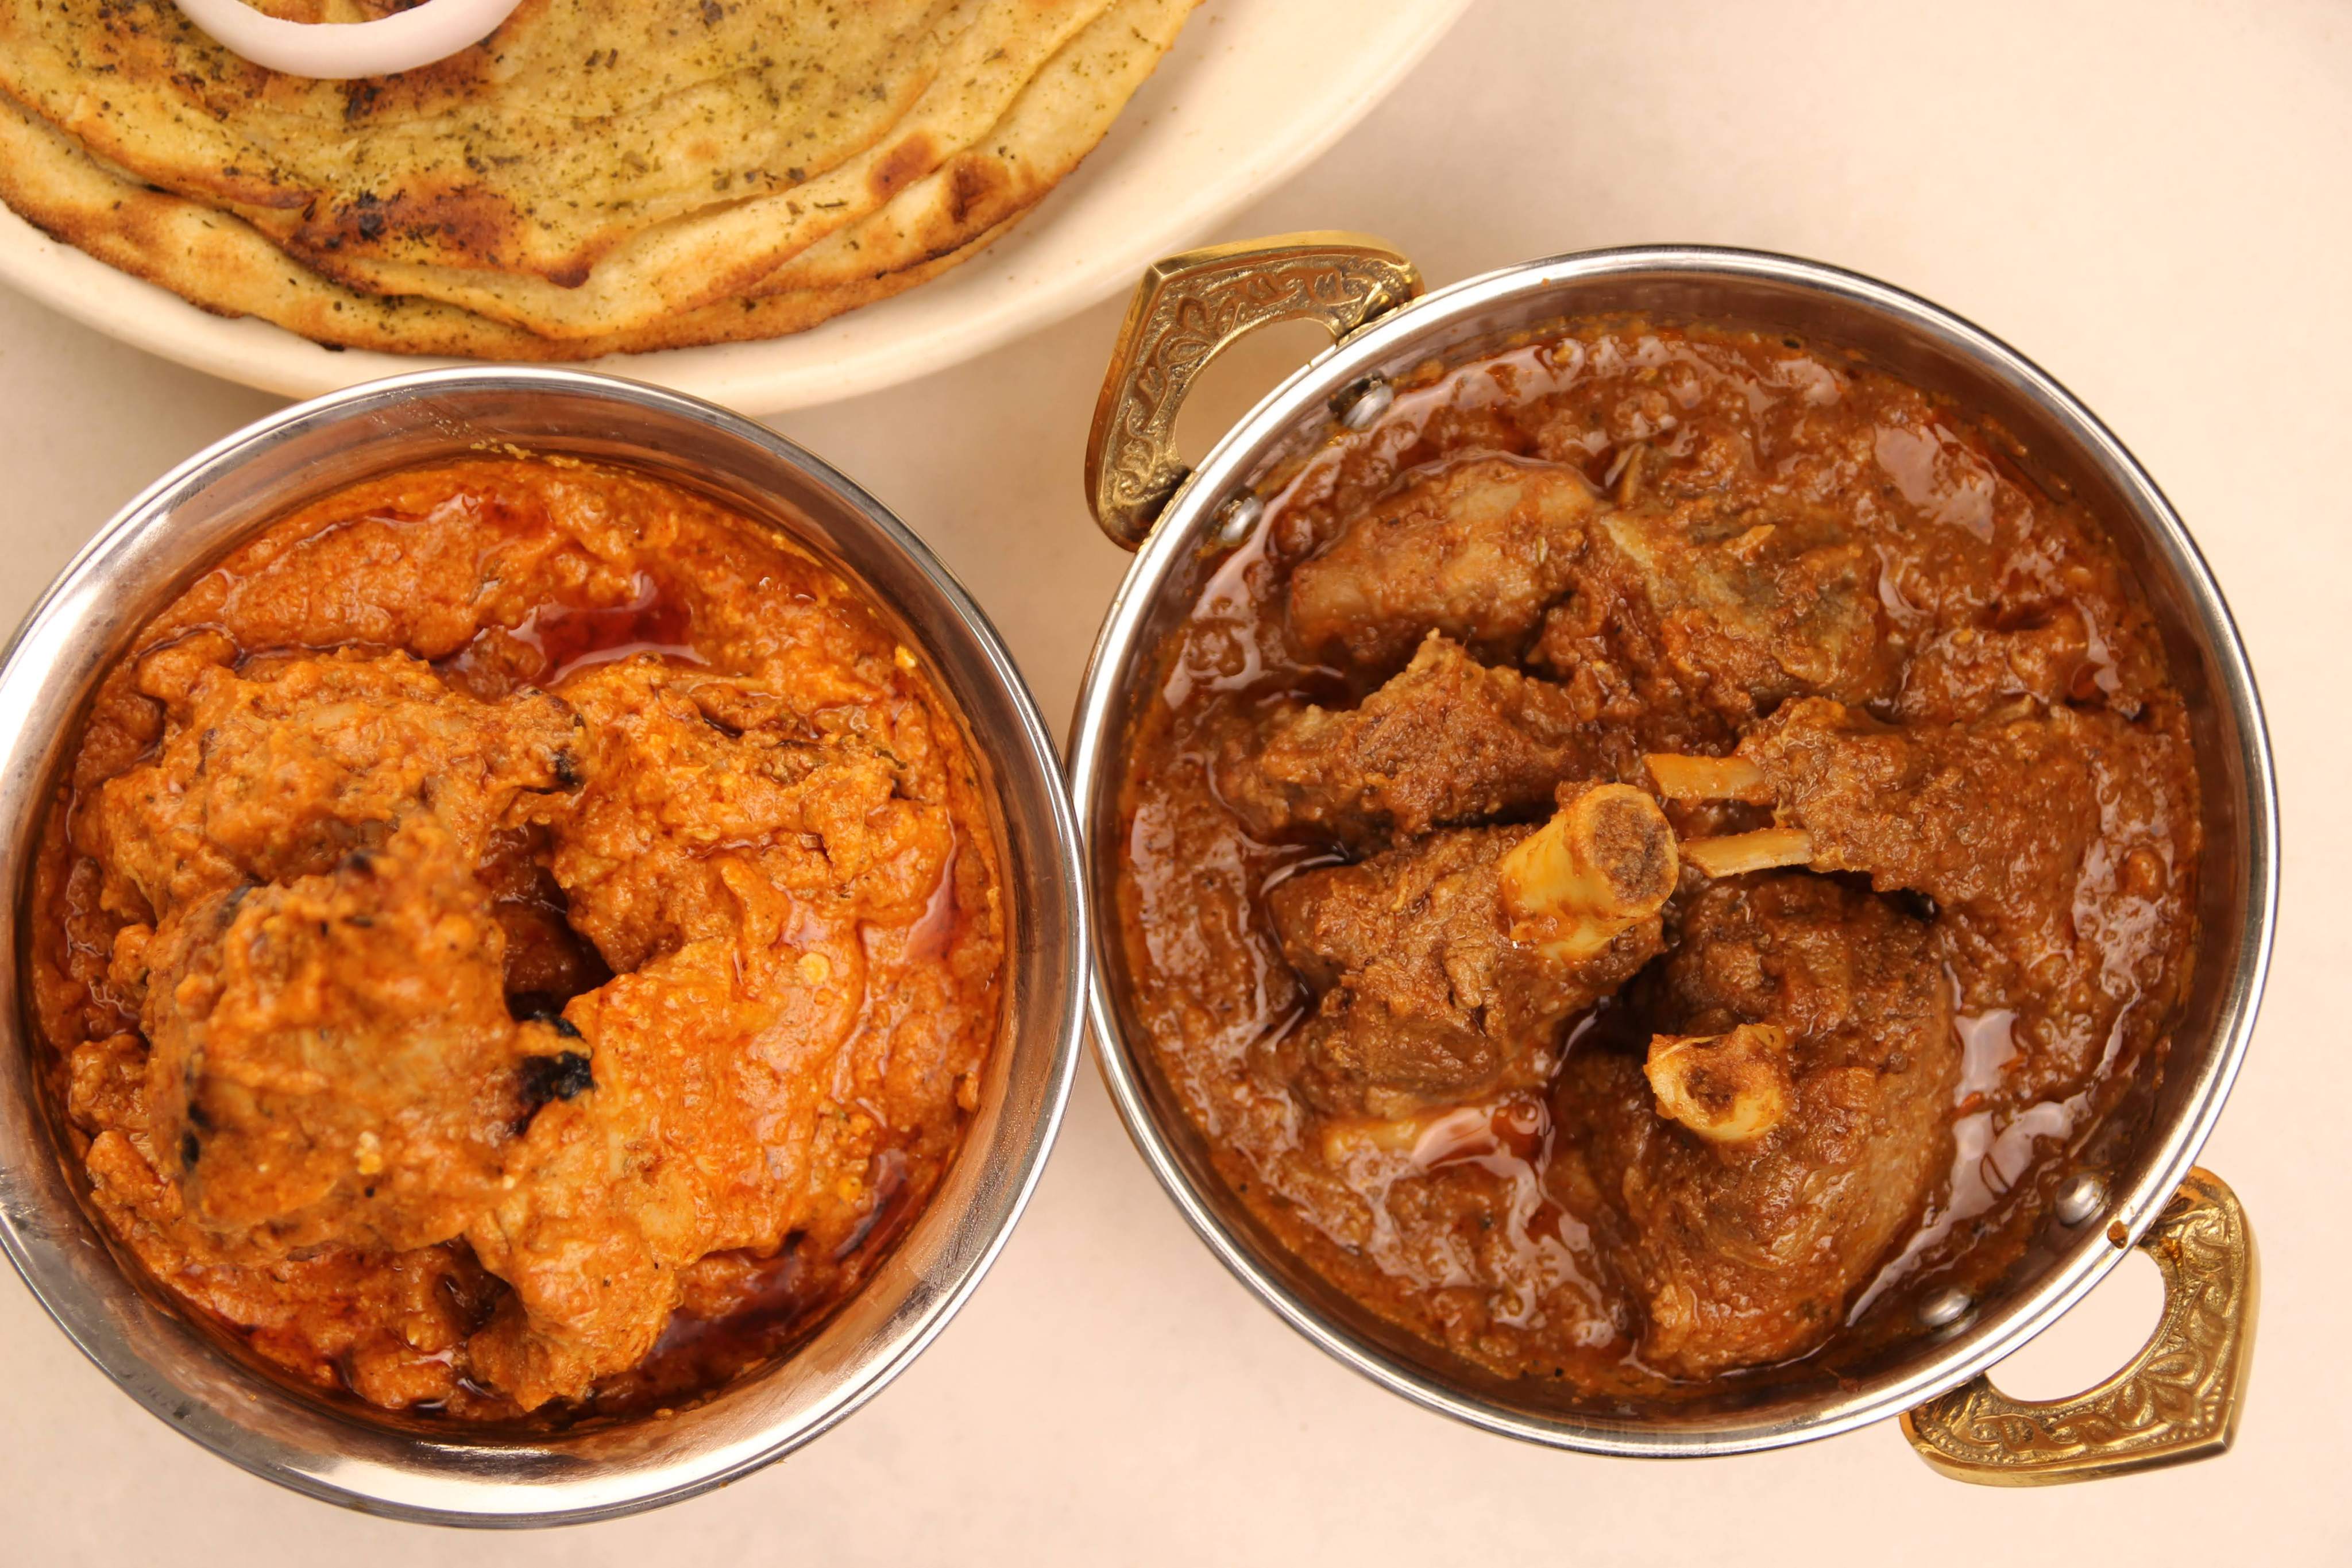 Indian food has been currying favour with the British for hundreds of years, while curry has become a generic word for any vegetable or meat with a gravy. Photo: Kalpana Sunder